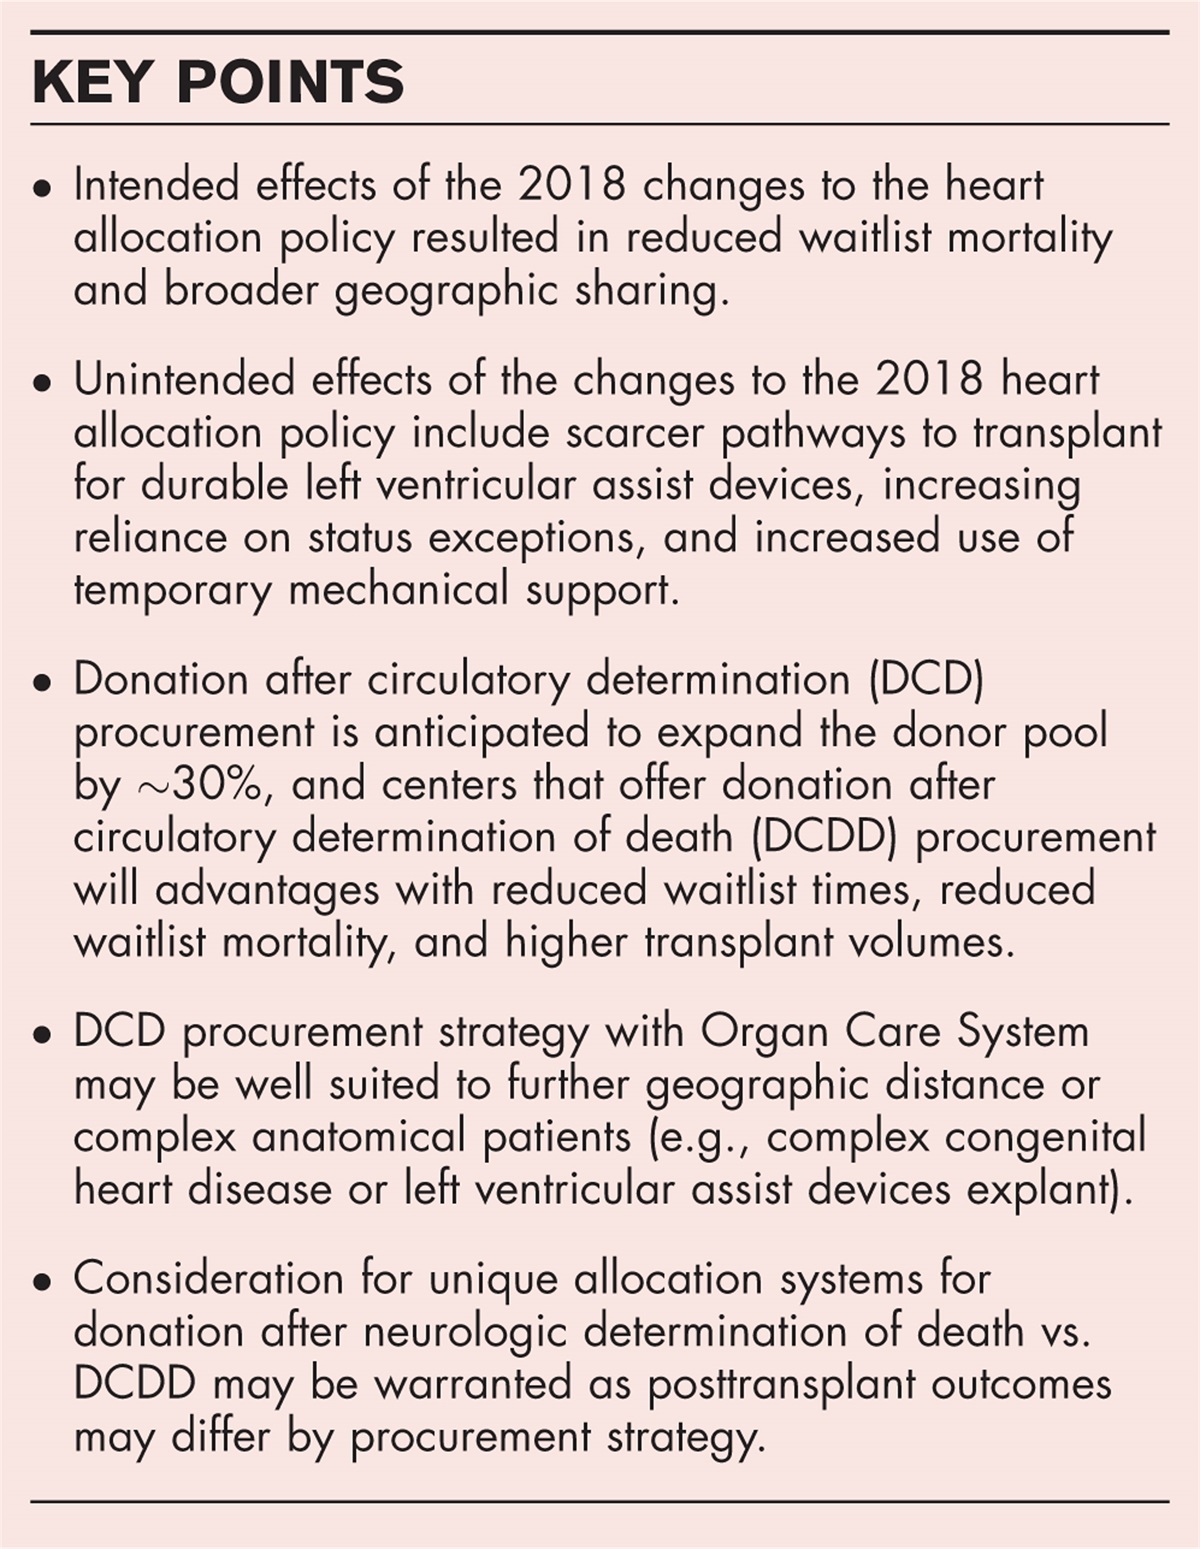 Donation after circulatory determination of death in heart transplant: impact on current and future allocation policy